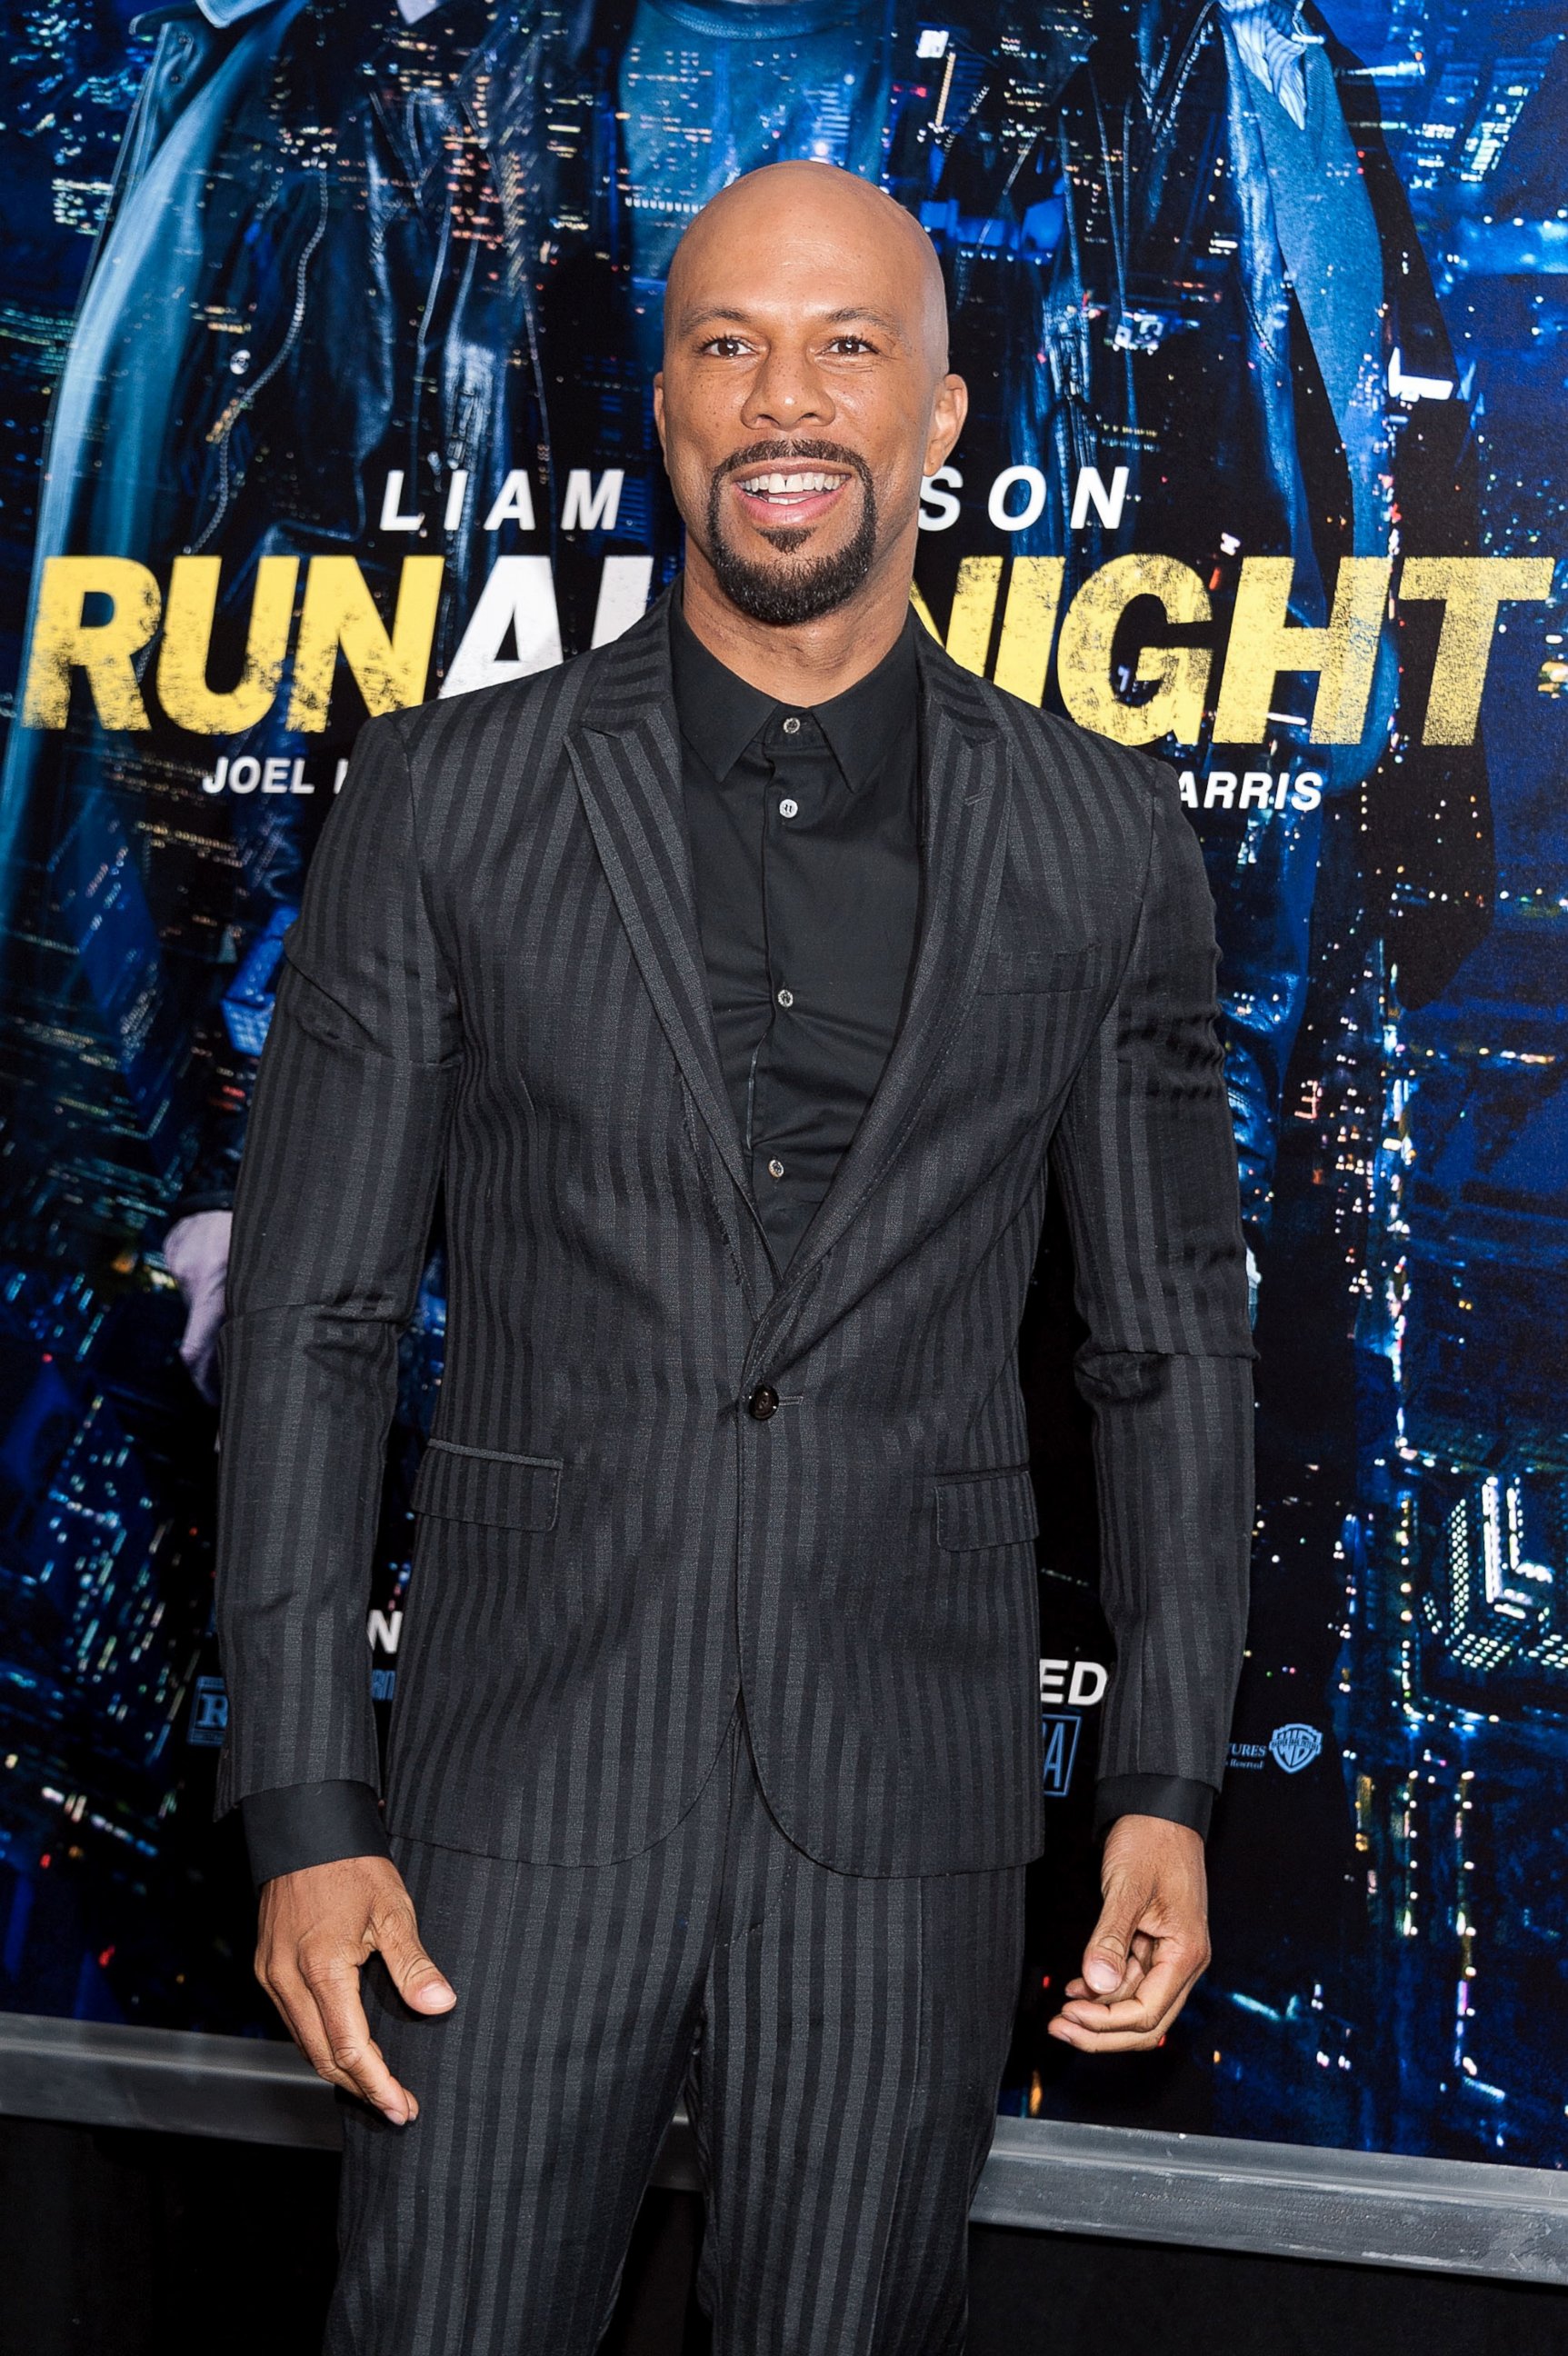 PHOTO: Common attends the "Run All Night" New York Premiere at AMC Lincoln Square Theater, March 9, 2015, in New York City.